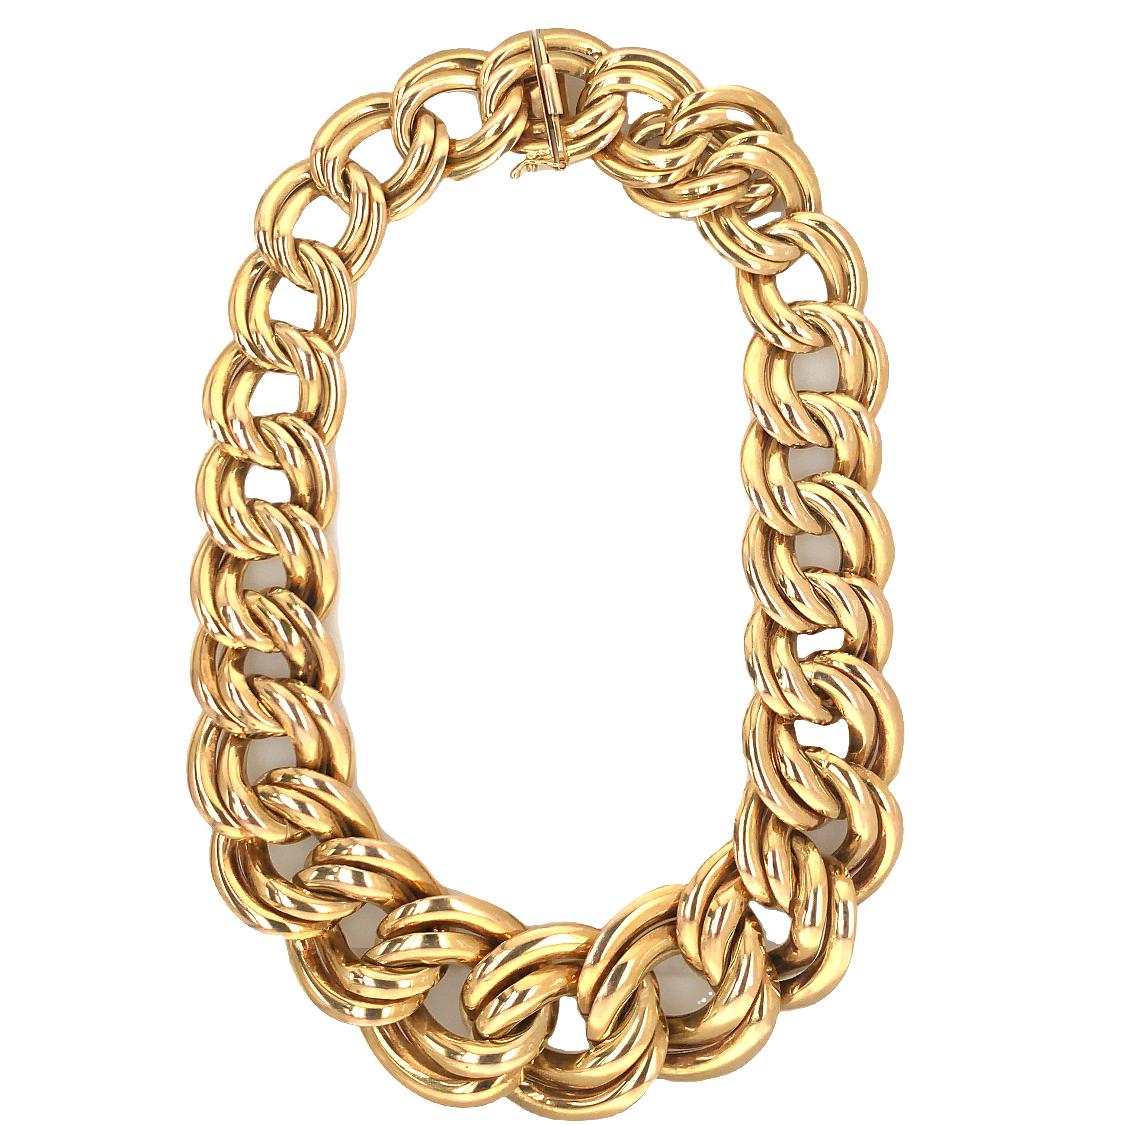 One oval double link 14K yellow gold necklace with a high polish finish throughout. The necklace measures 32 mm. wide at the center and tapers to 20 mm. wide at the clasp. Circa 1970s.

Chunky, grand, flash.

Metal: 14k yellow gold
Circa: